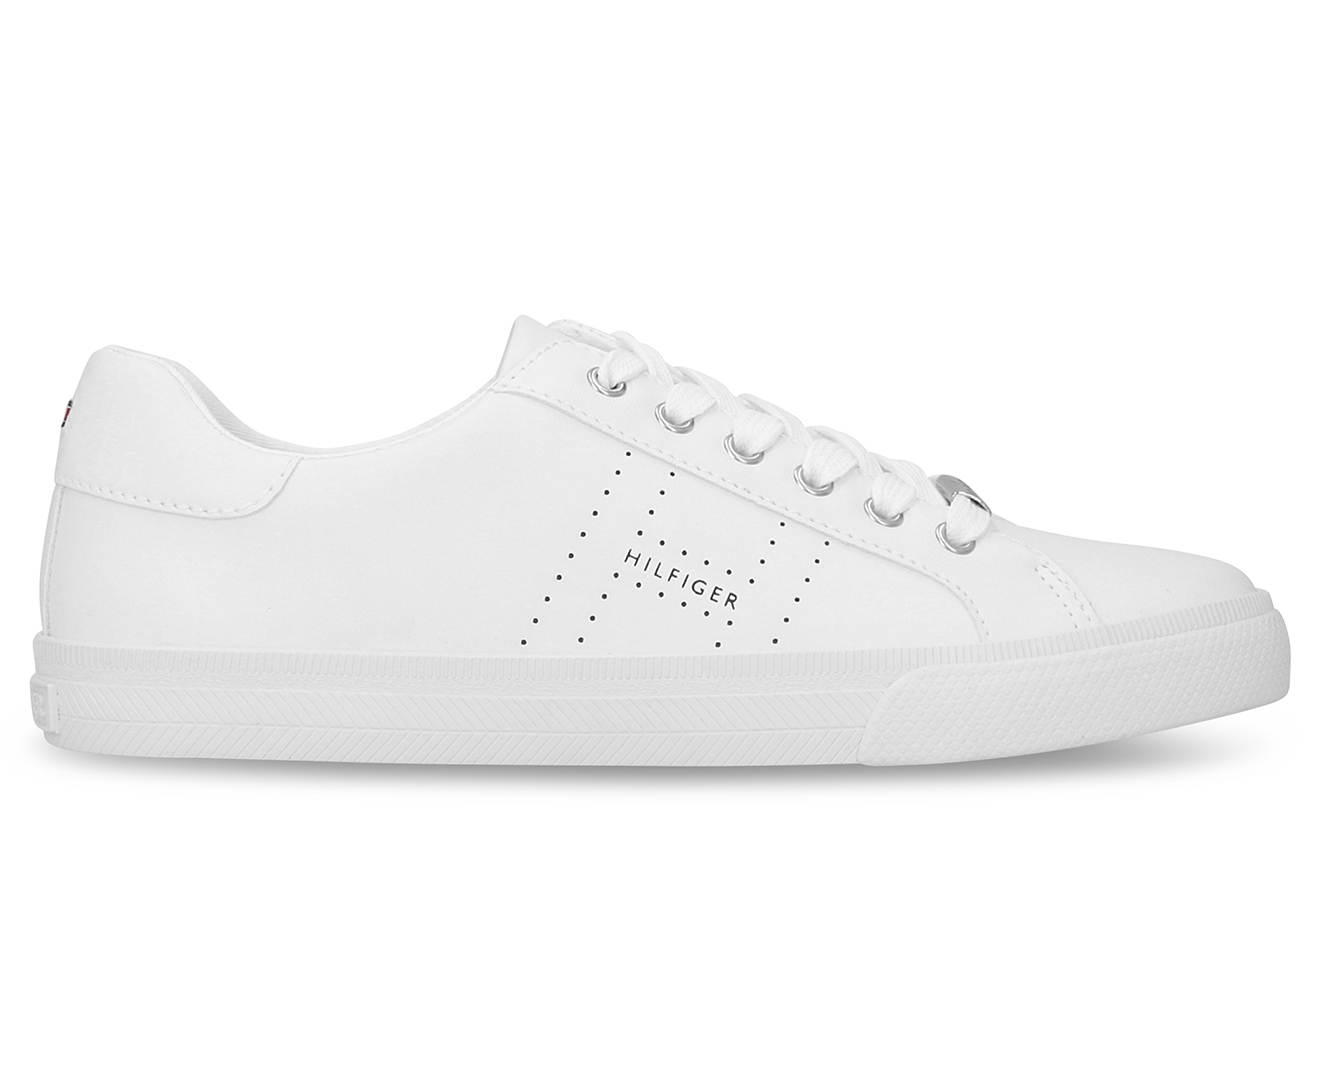 Tommy Hilfiger Women's Lustern Sneakers - White | Catch.com.au